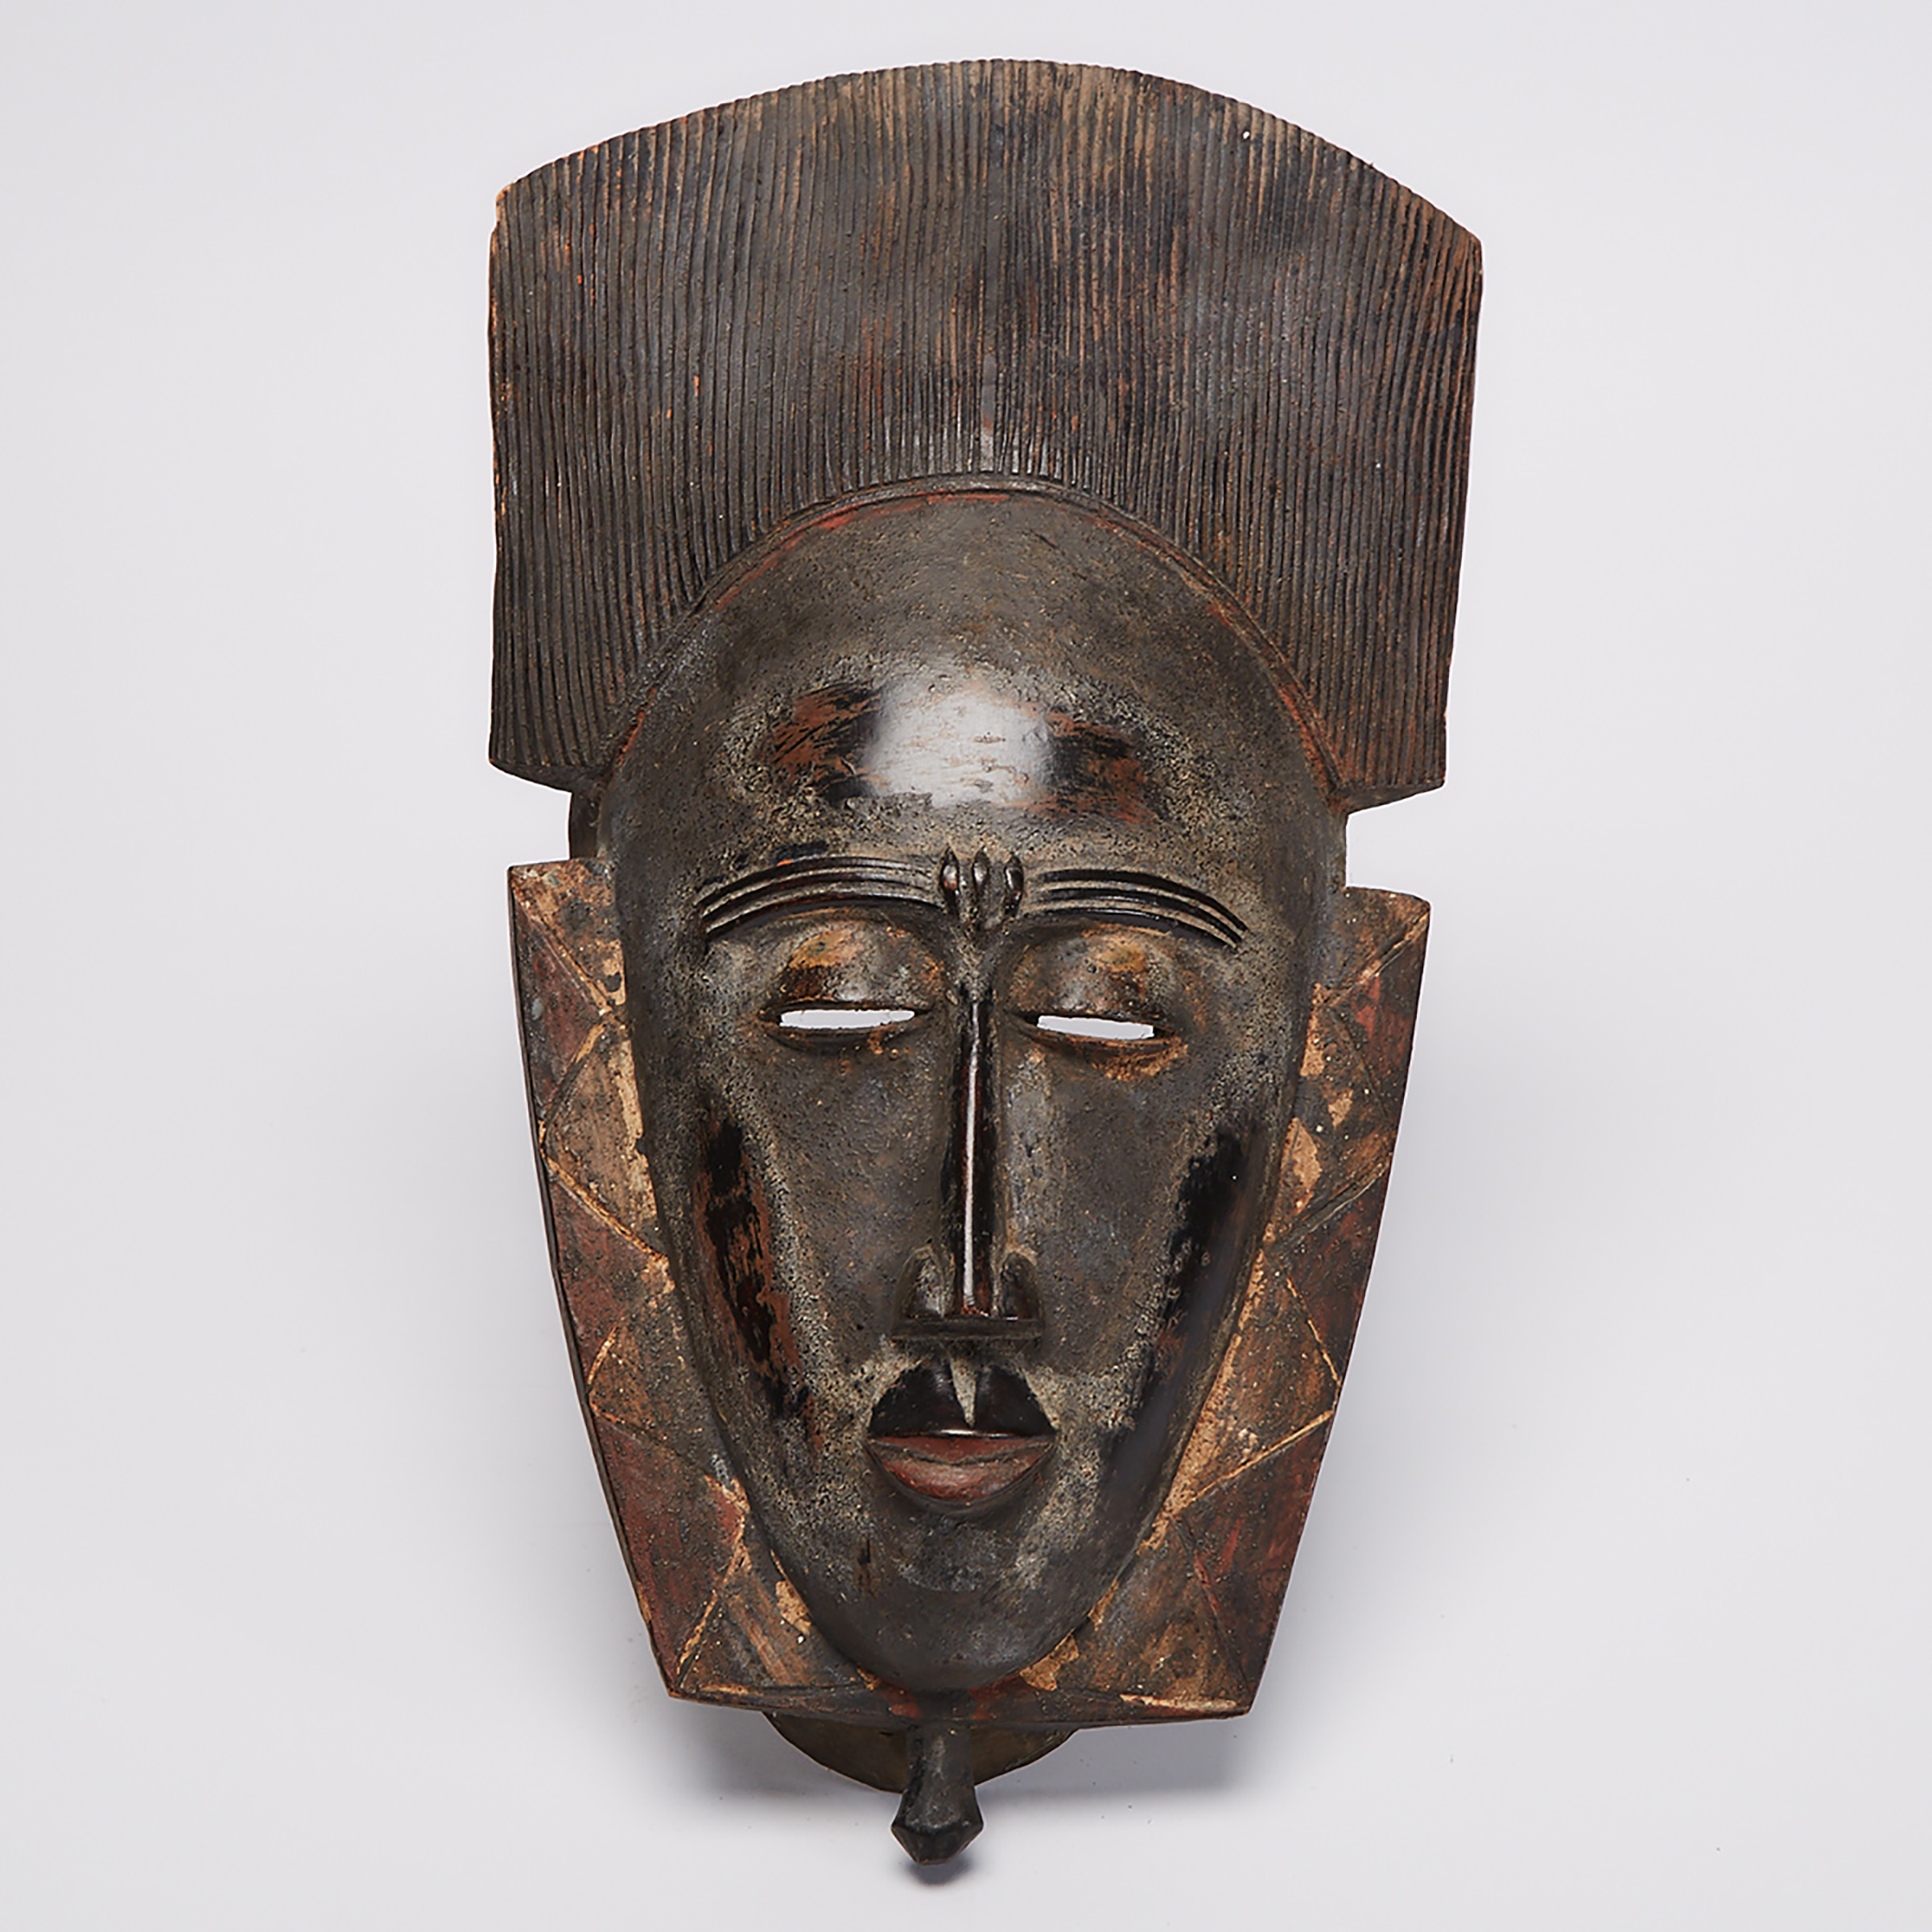 Baule Mask, Ivory Coast, West Africa, early to mid 20th century